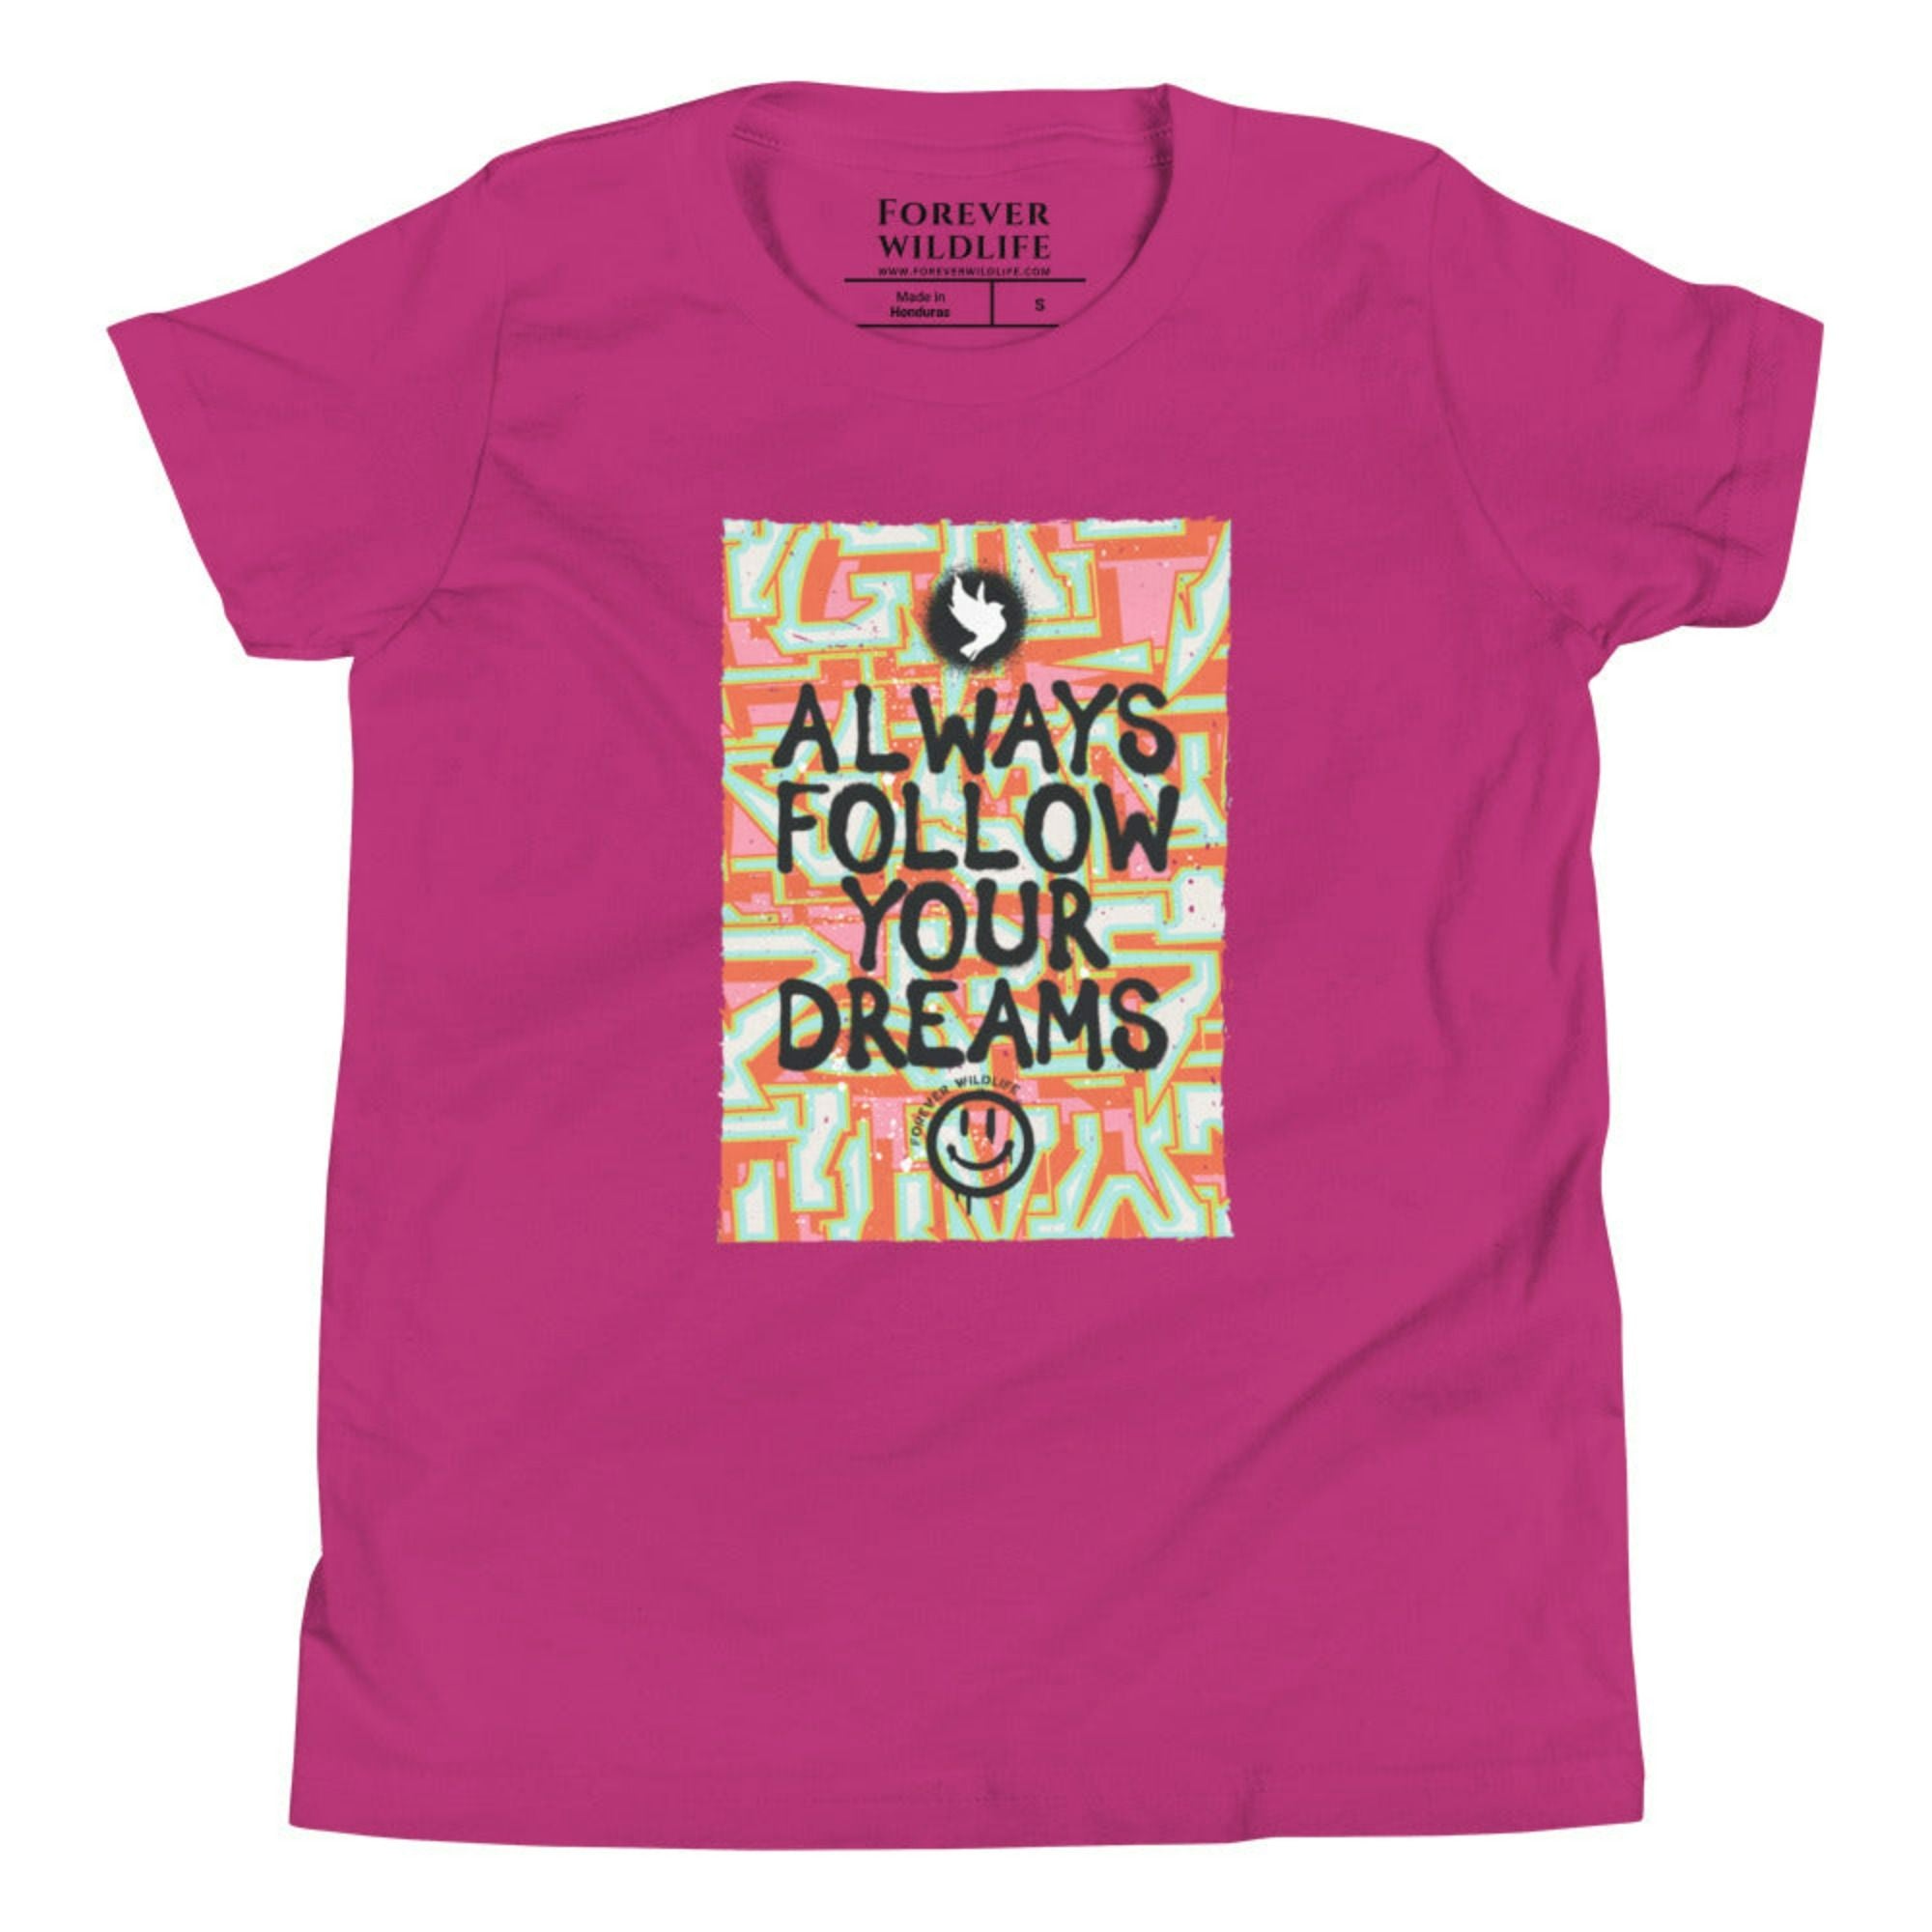 ALWAYS FOLLOW YOUR DREAMS DOVE YOUTH T-SHIRT